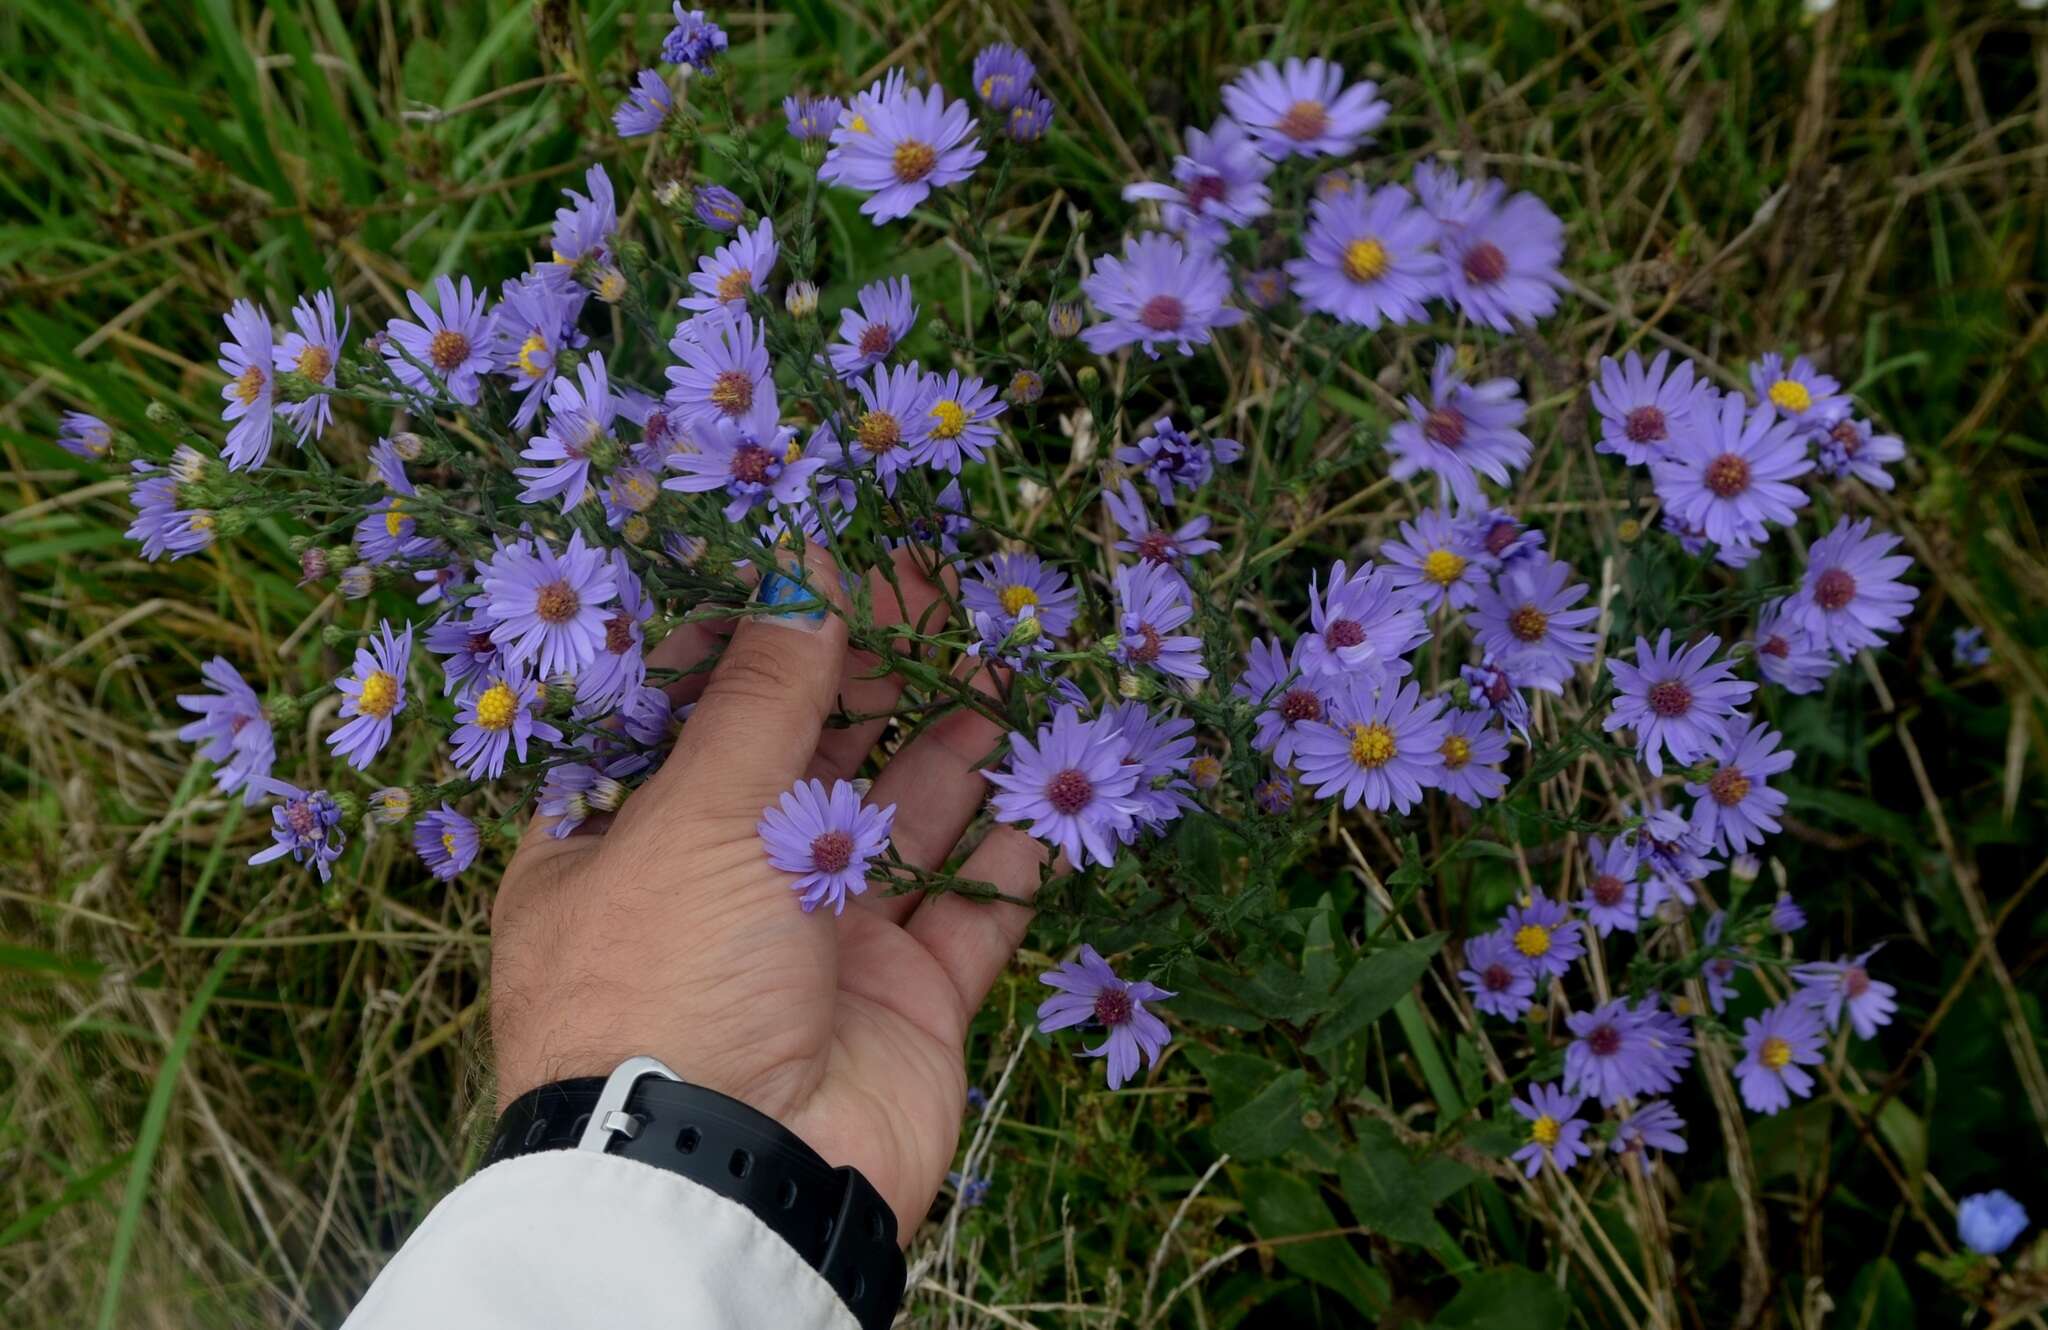 Image of smooth blue aster